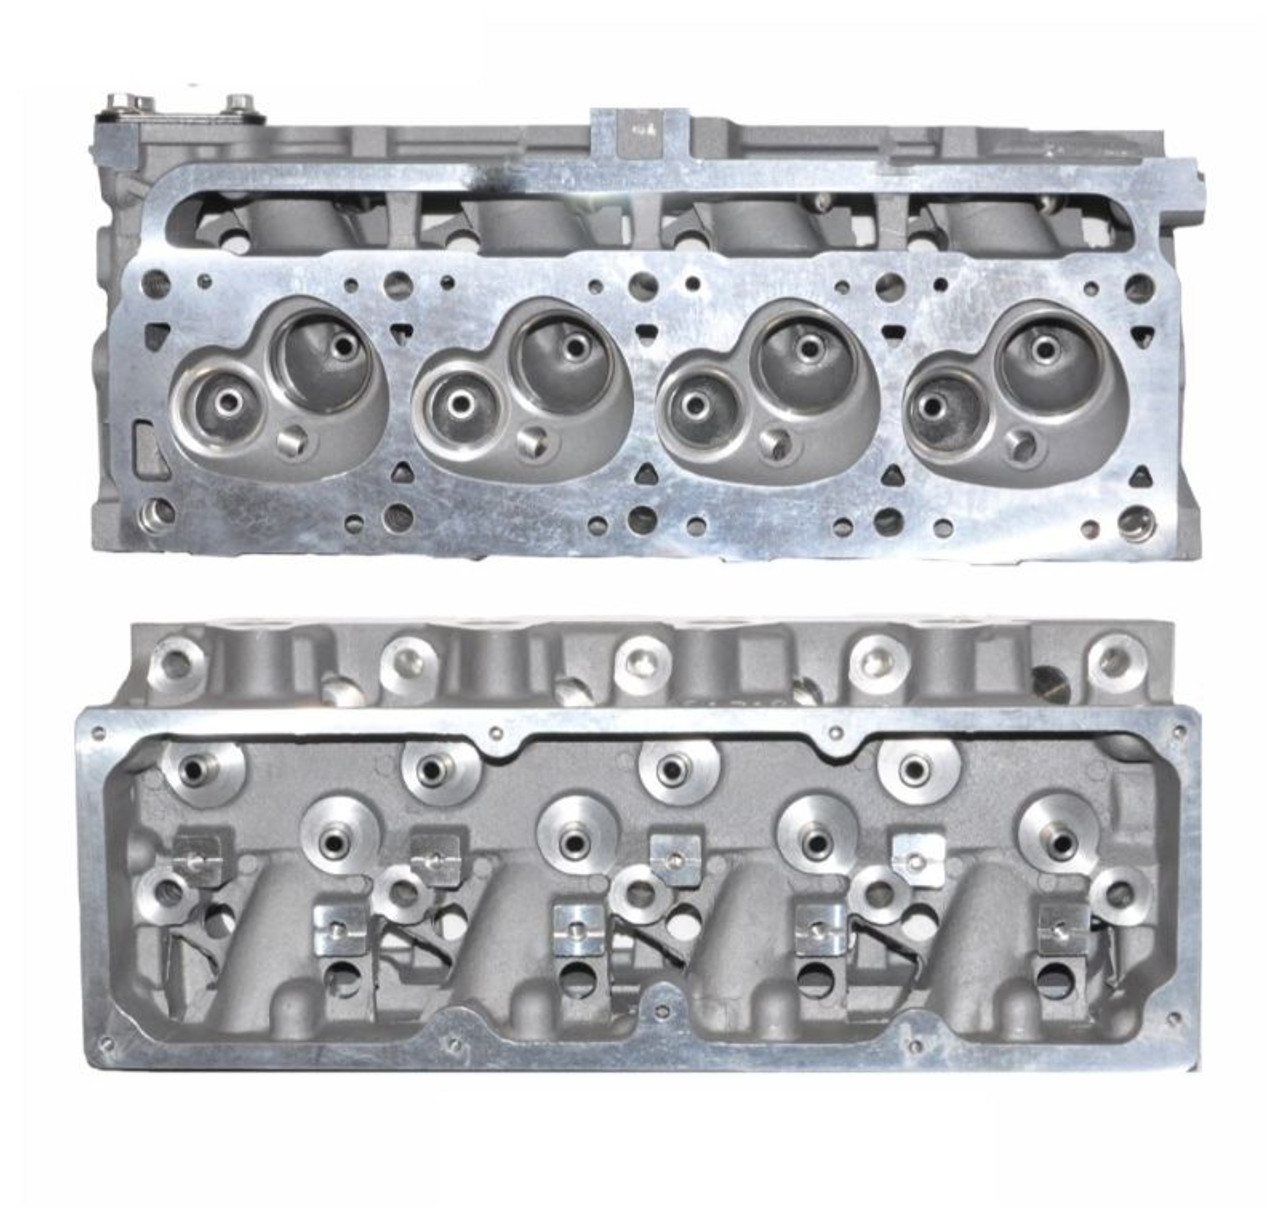 Cylinder Head - 1995 Chevrolet S10 2.2L (EHC134-3.A5)